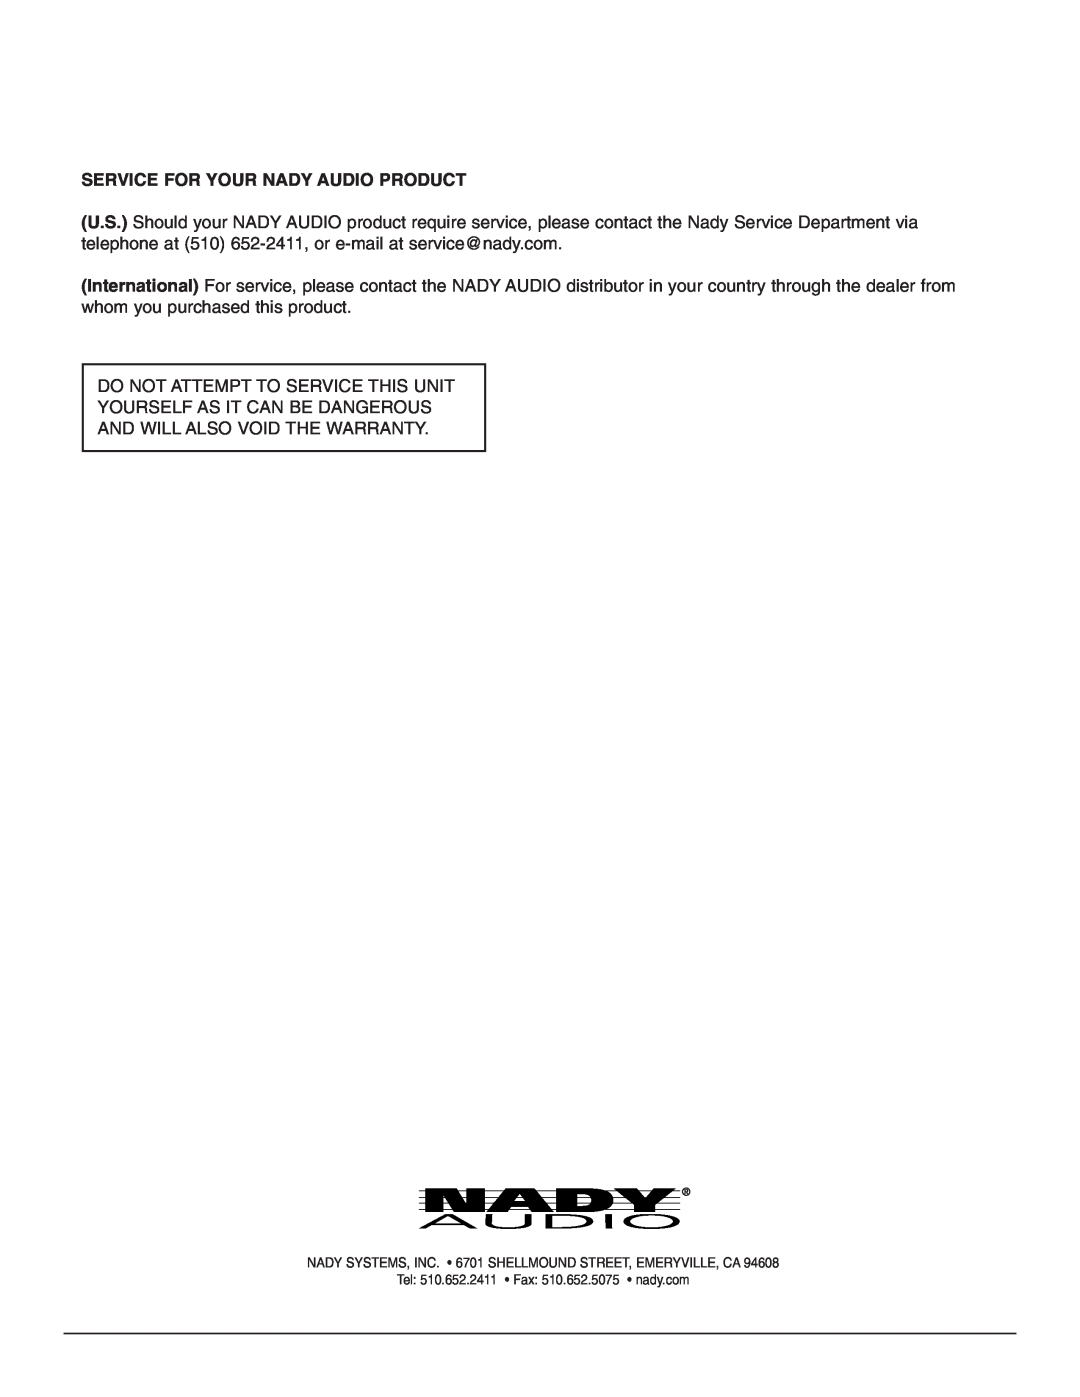 Nady Systems GTA-1260 owner manual Service For Your Nady Audio Product 